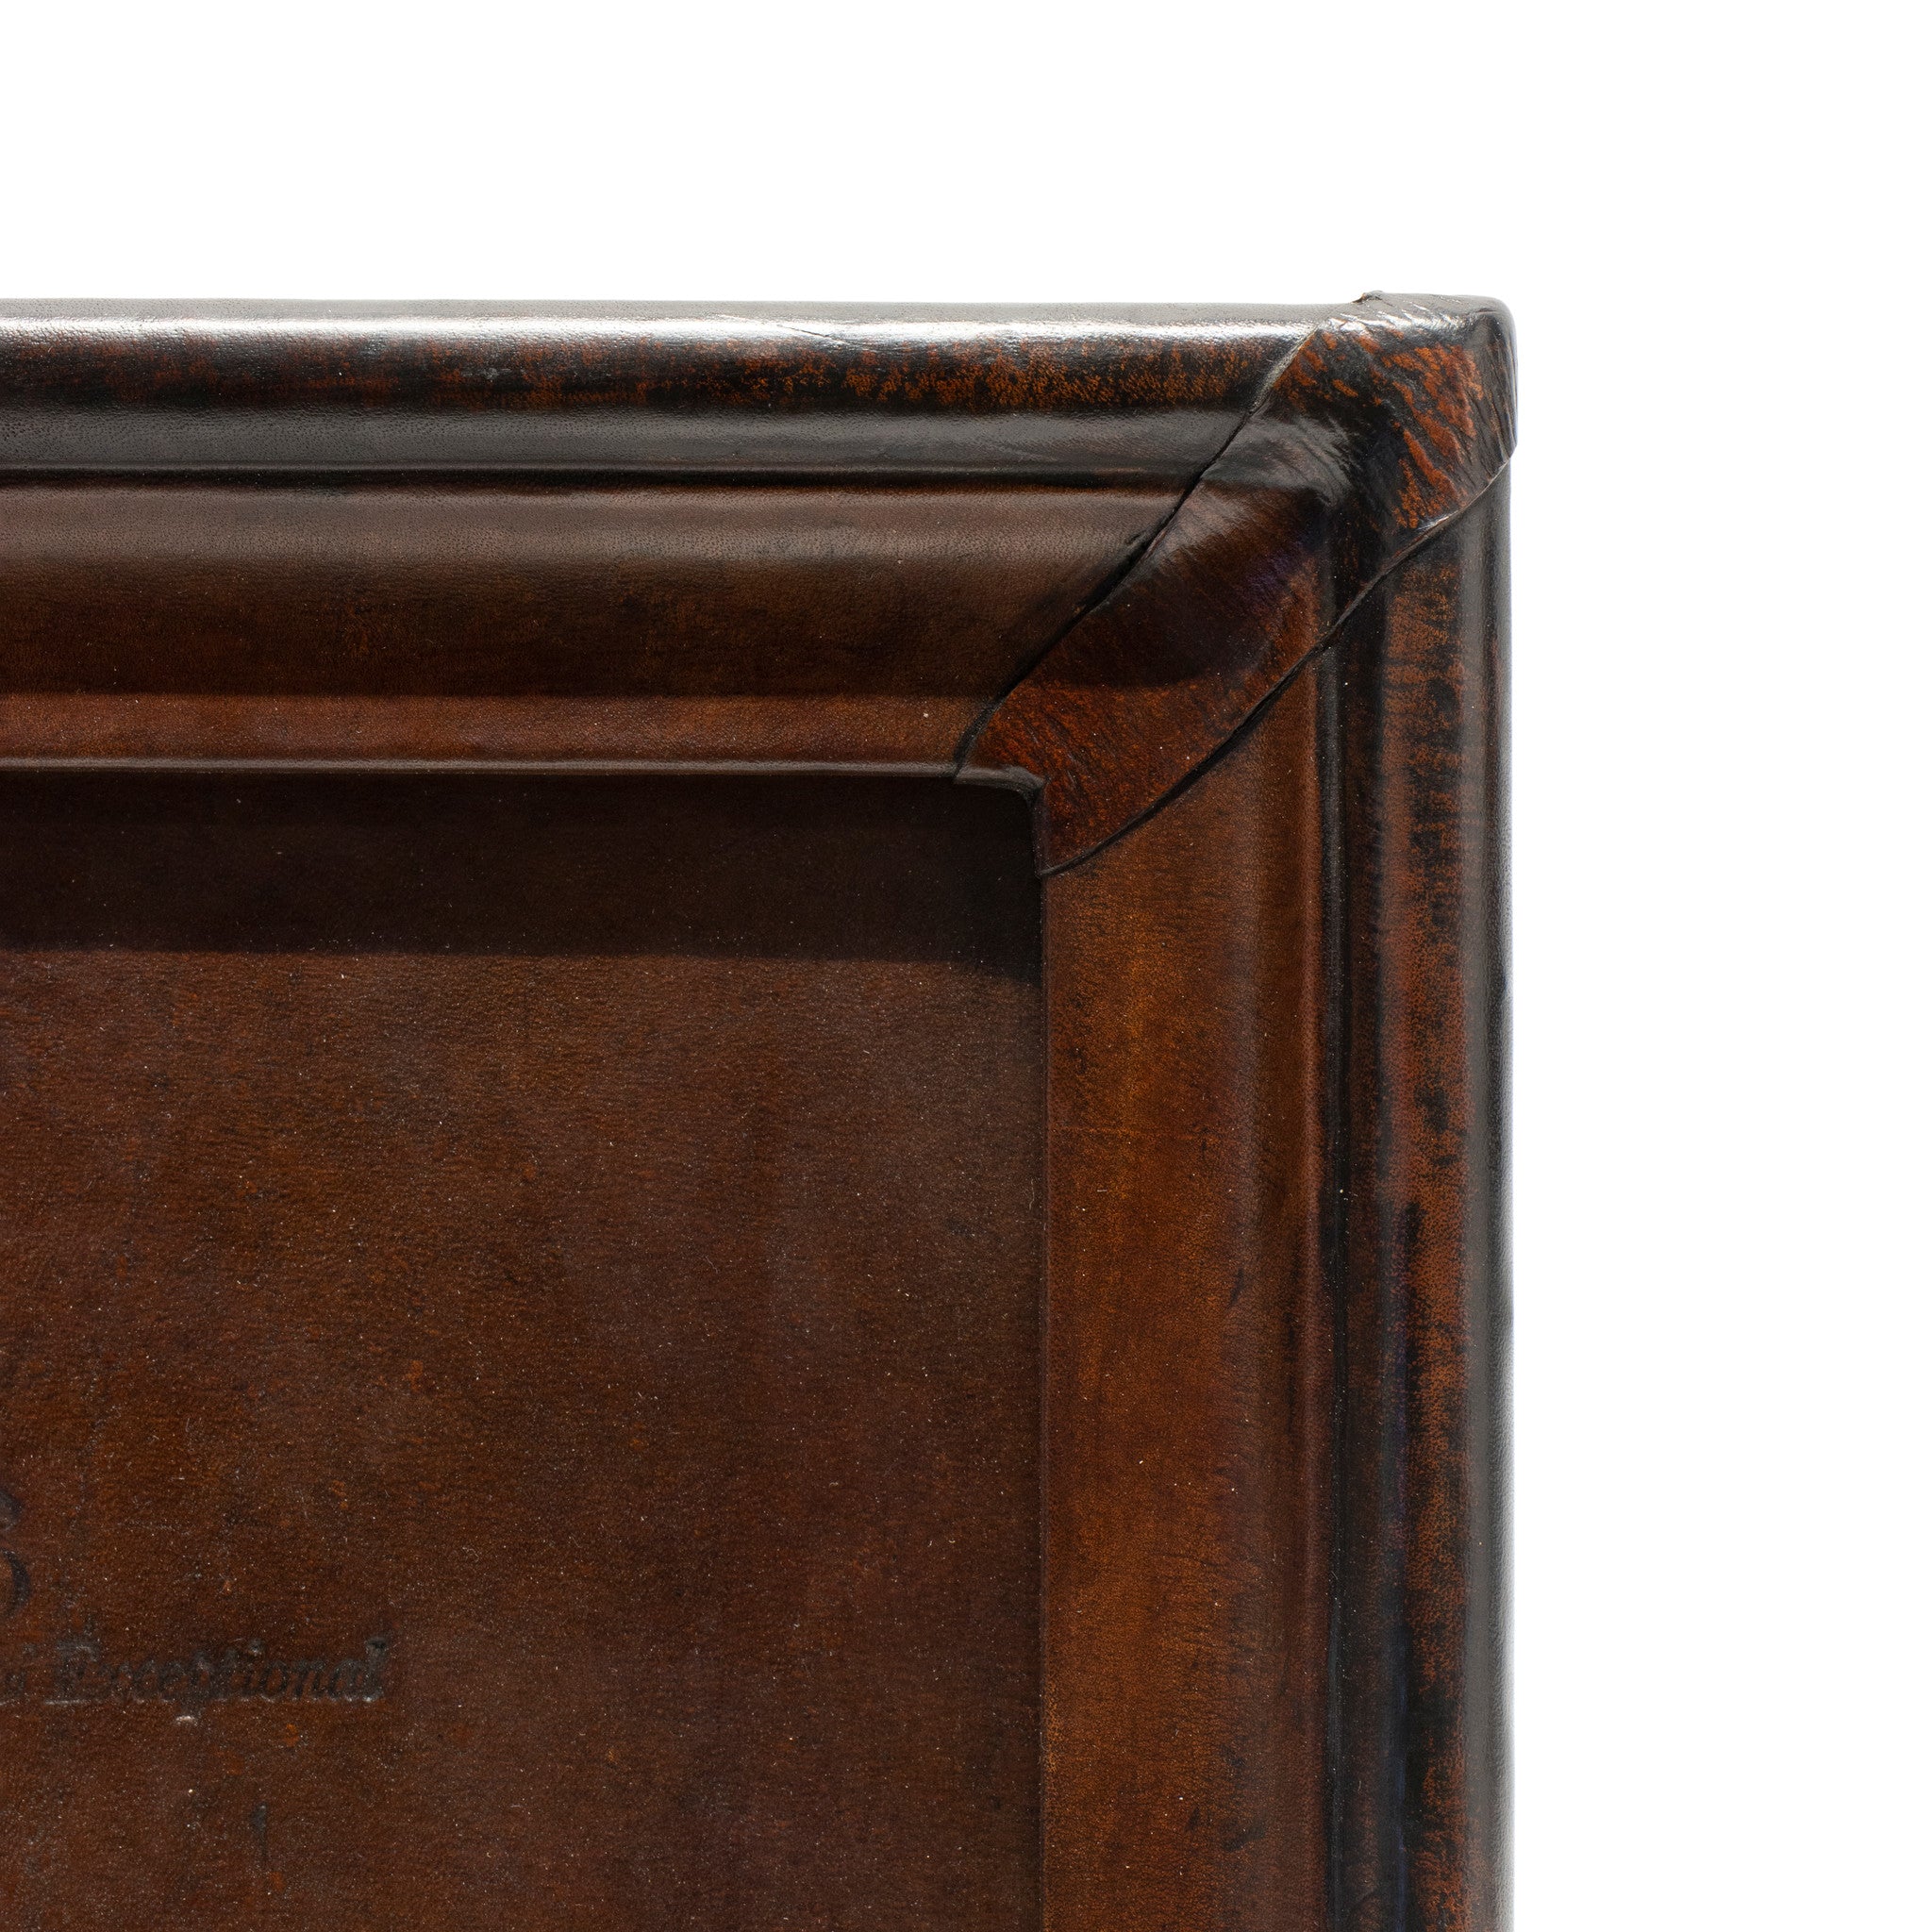 Dark Brown & Black Leather Tabletop Picture Frame - The Dressage